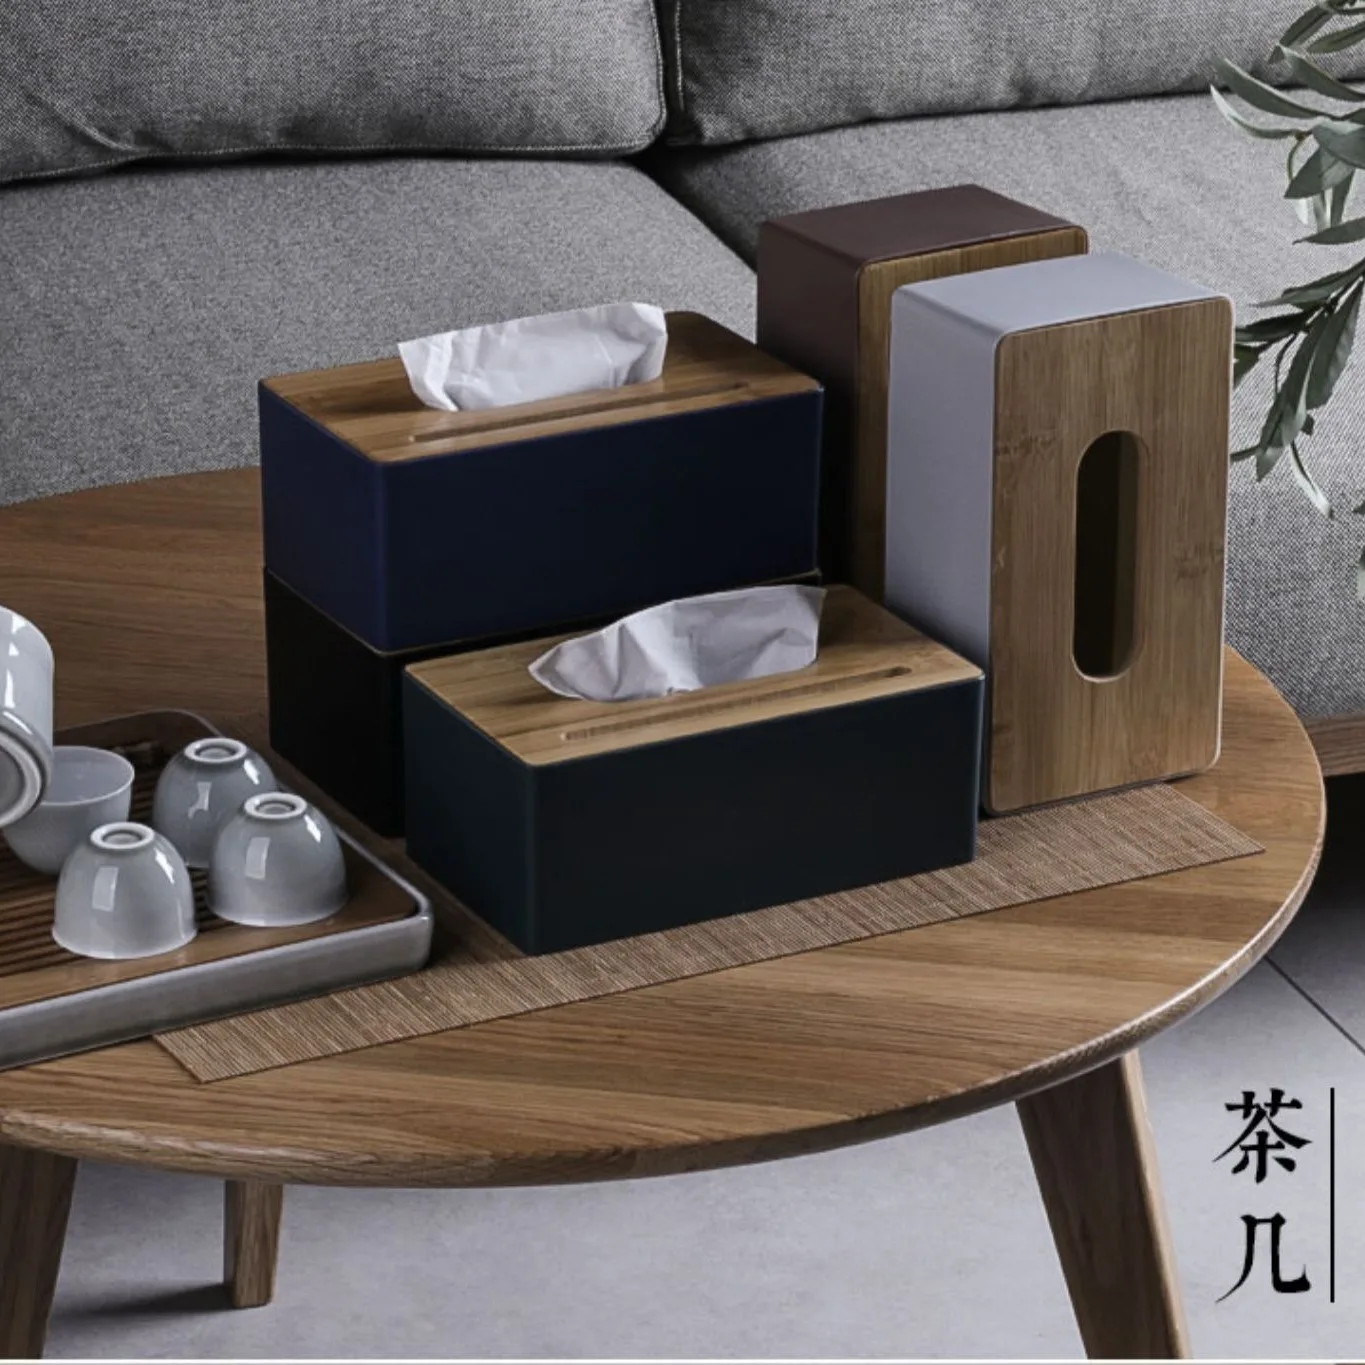 

Nordic Tissue Box Napkin Holder Case Paper Box Container Bamboo Skin Solid Wood Hotel Storage Box Home Dining Table Decoration